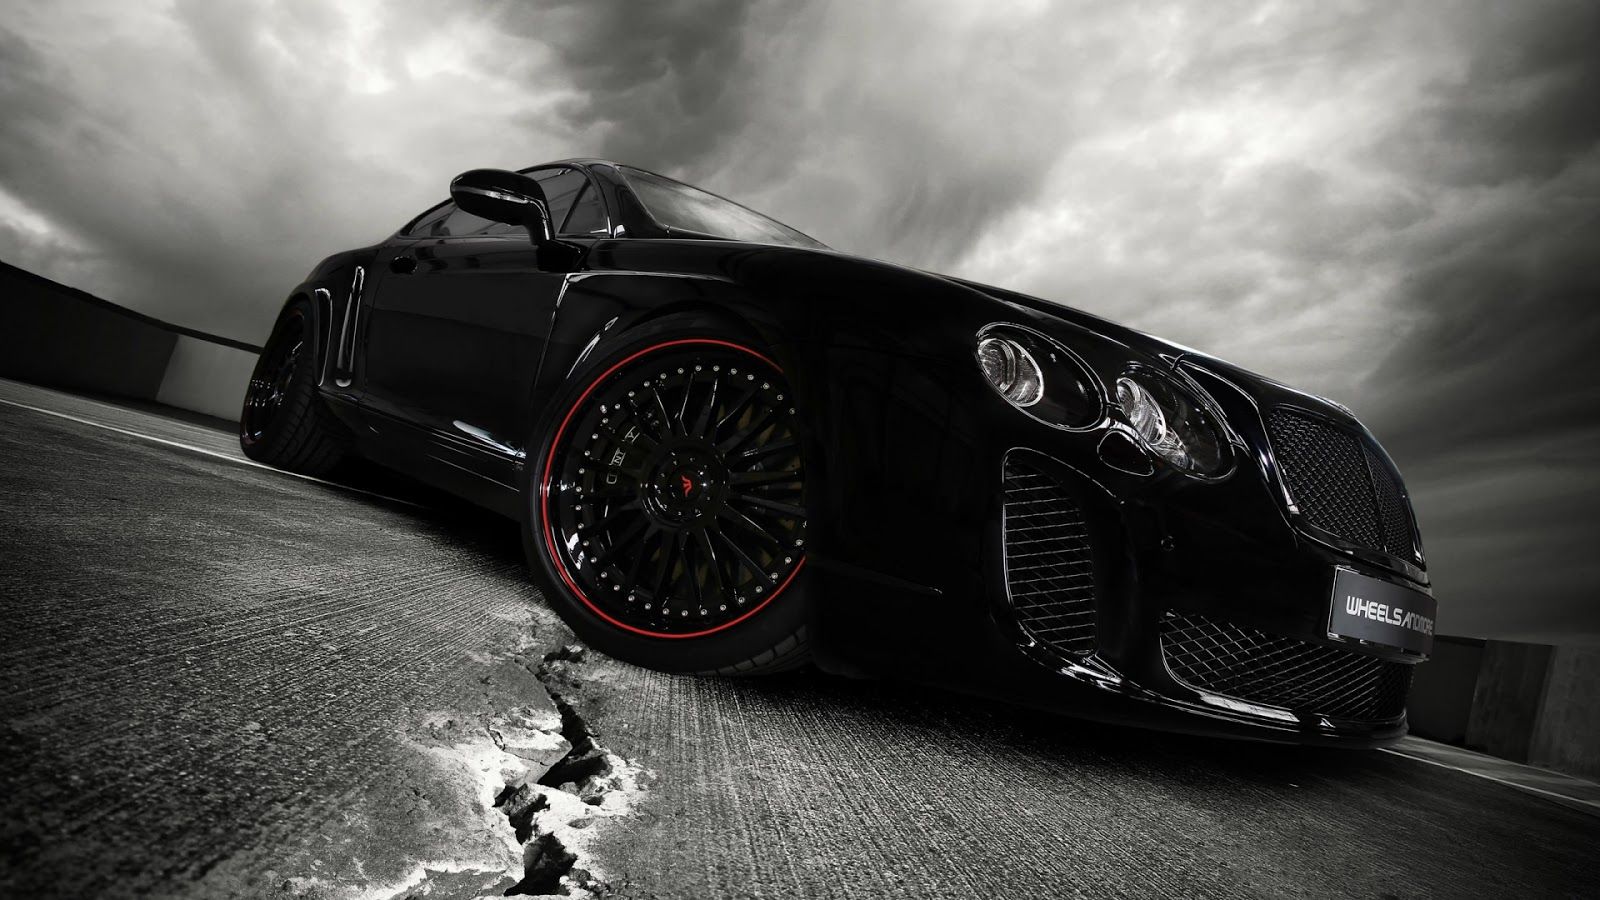 Cool Black Cars Wallpaper Wallpaper Background of Your Choice